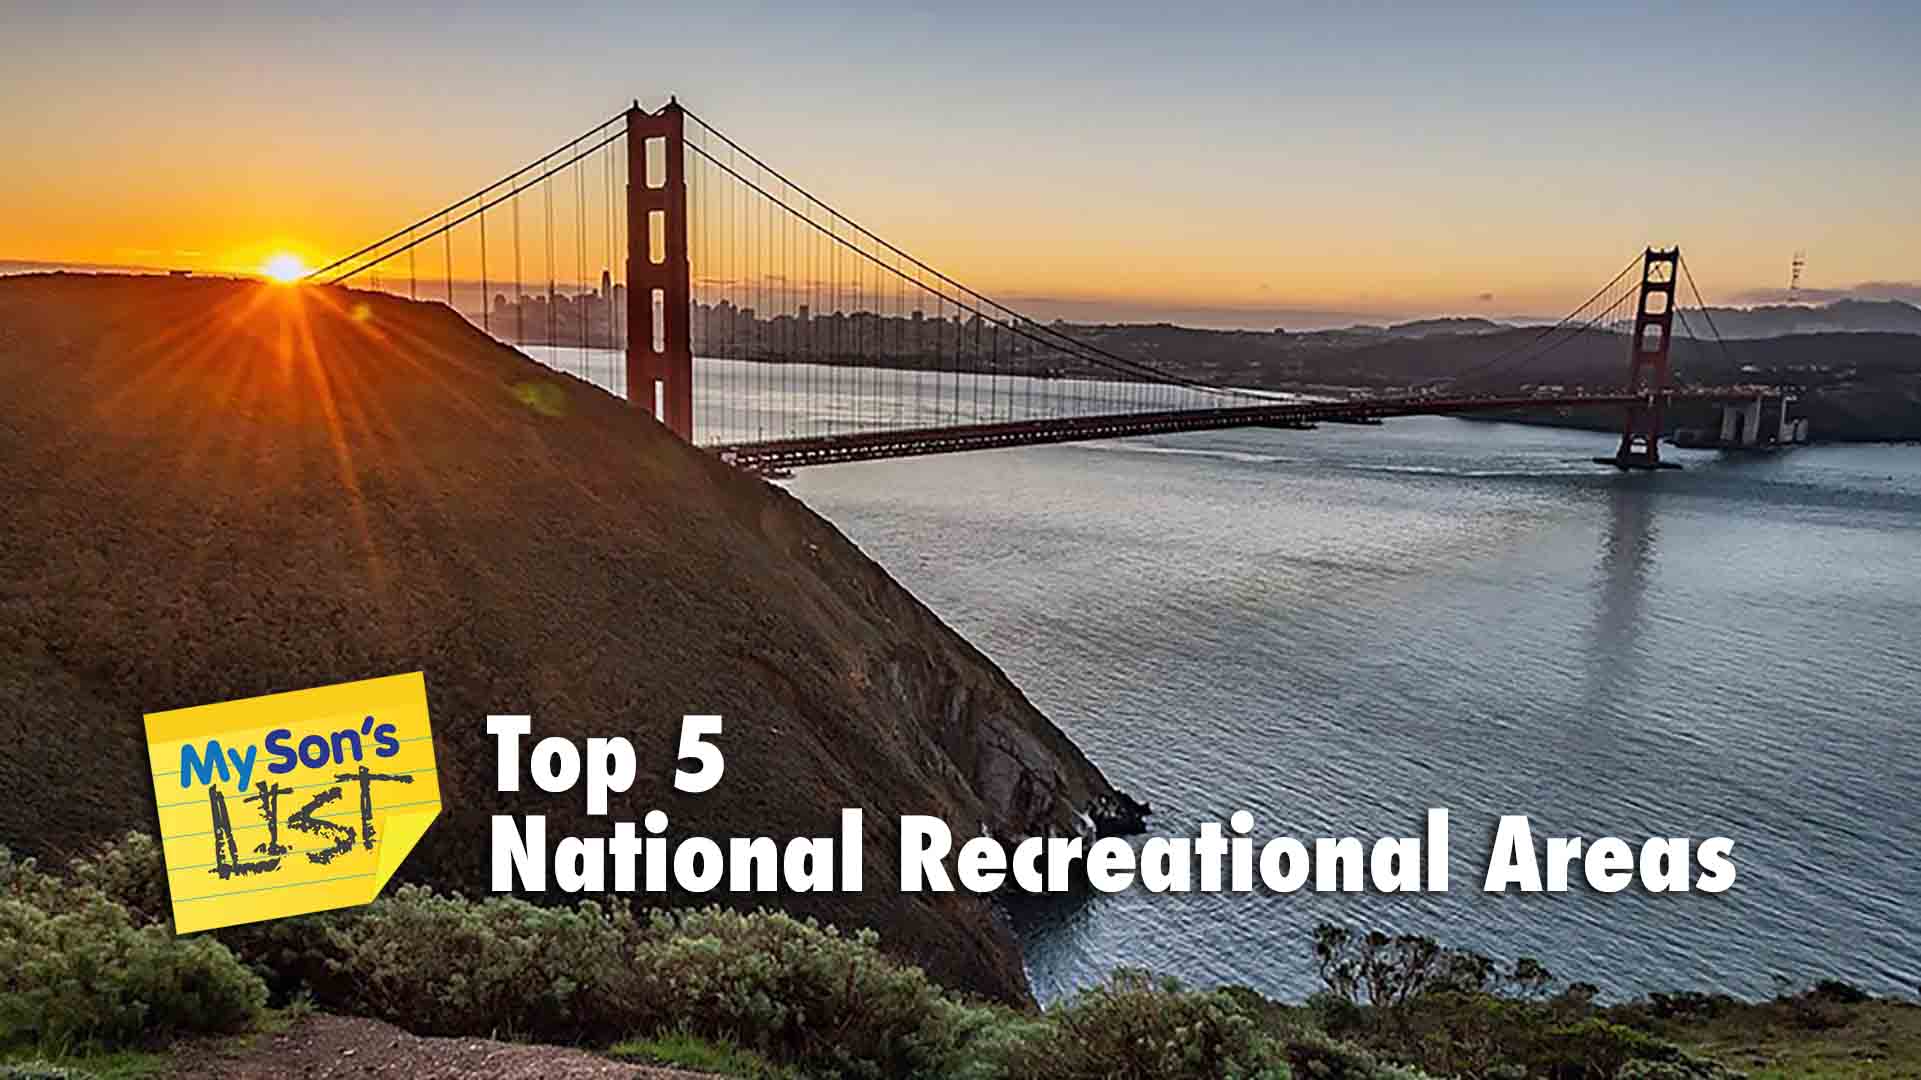 My Son's List of Top 5 National Recreation Areas